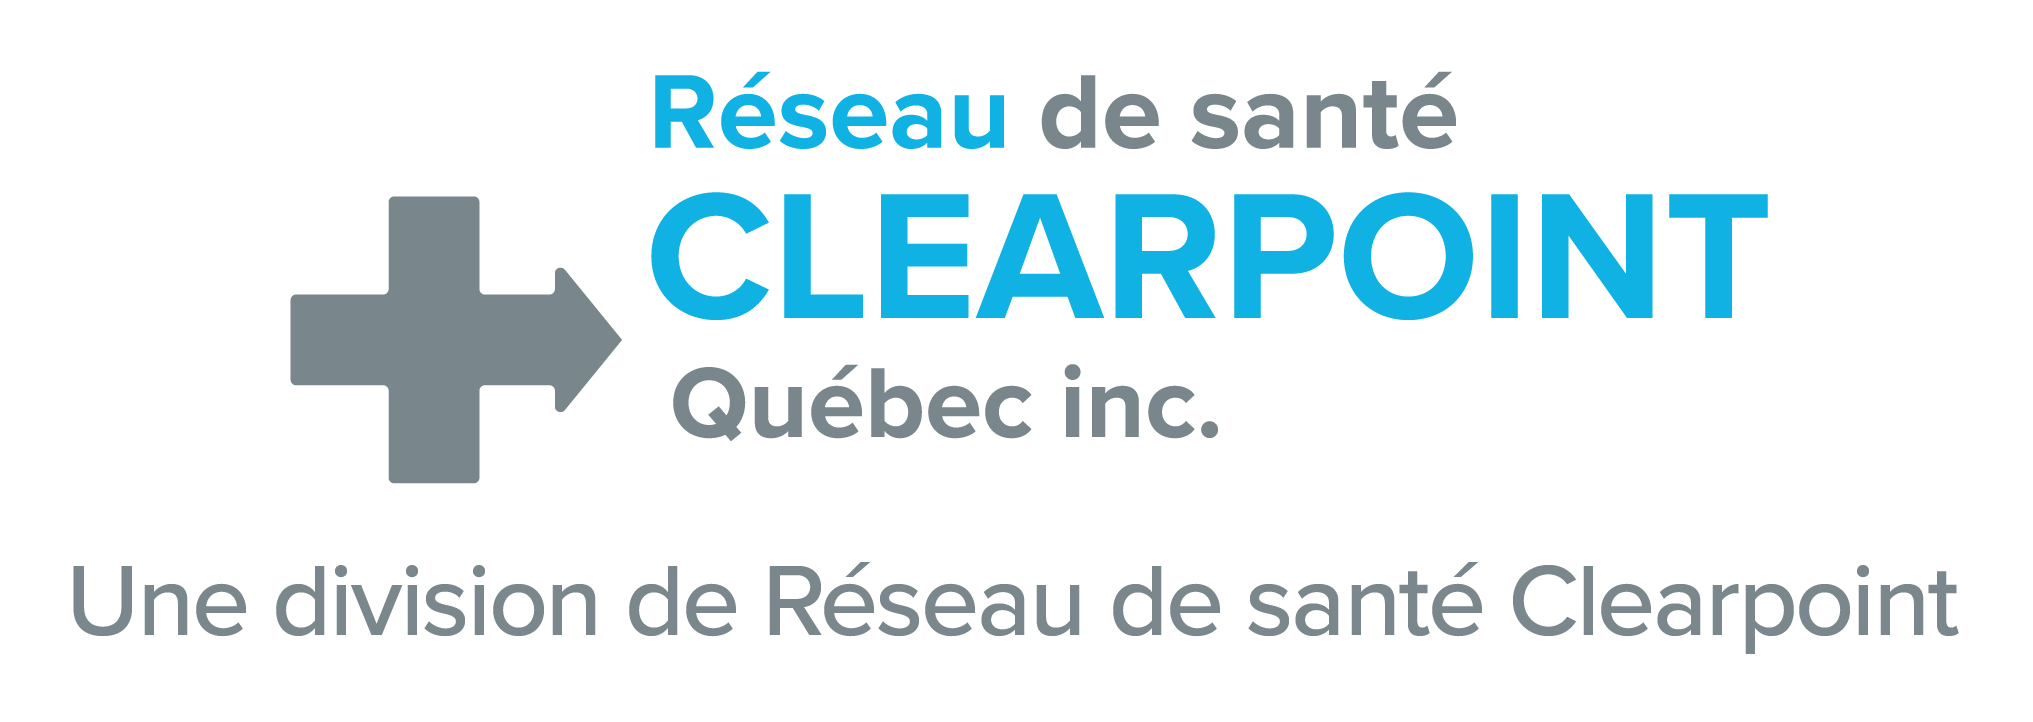 Clearpoint Quebec (Français) | Clearpoint Health Network